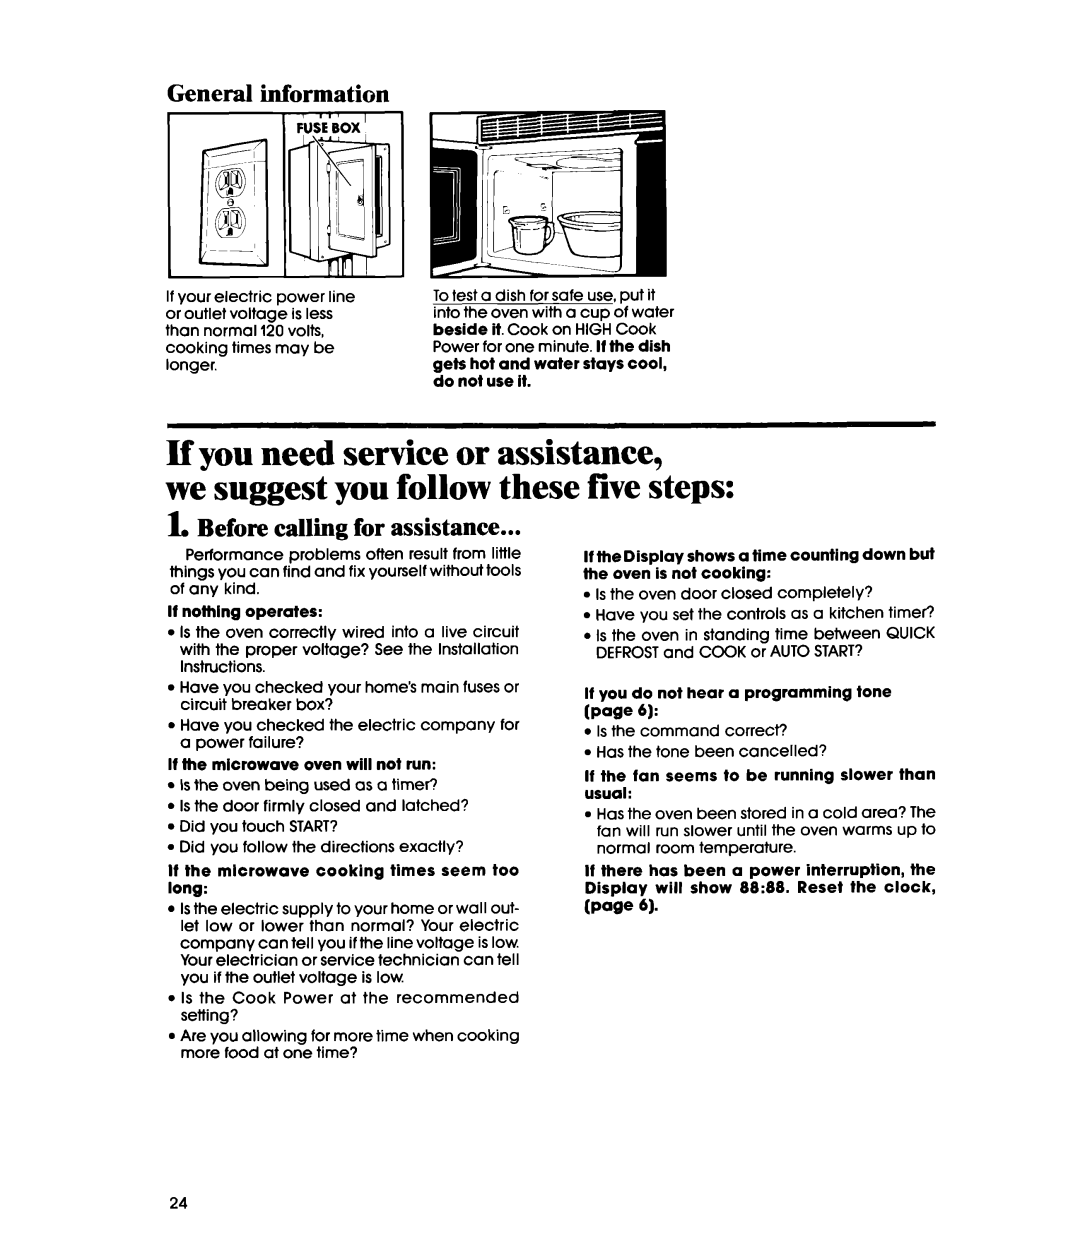 Whirlpool MH6600XV manual If you need service or assistance, we suggest you follow these five steps, General information 